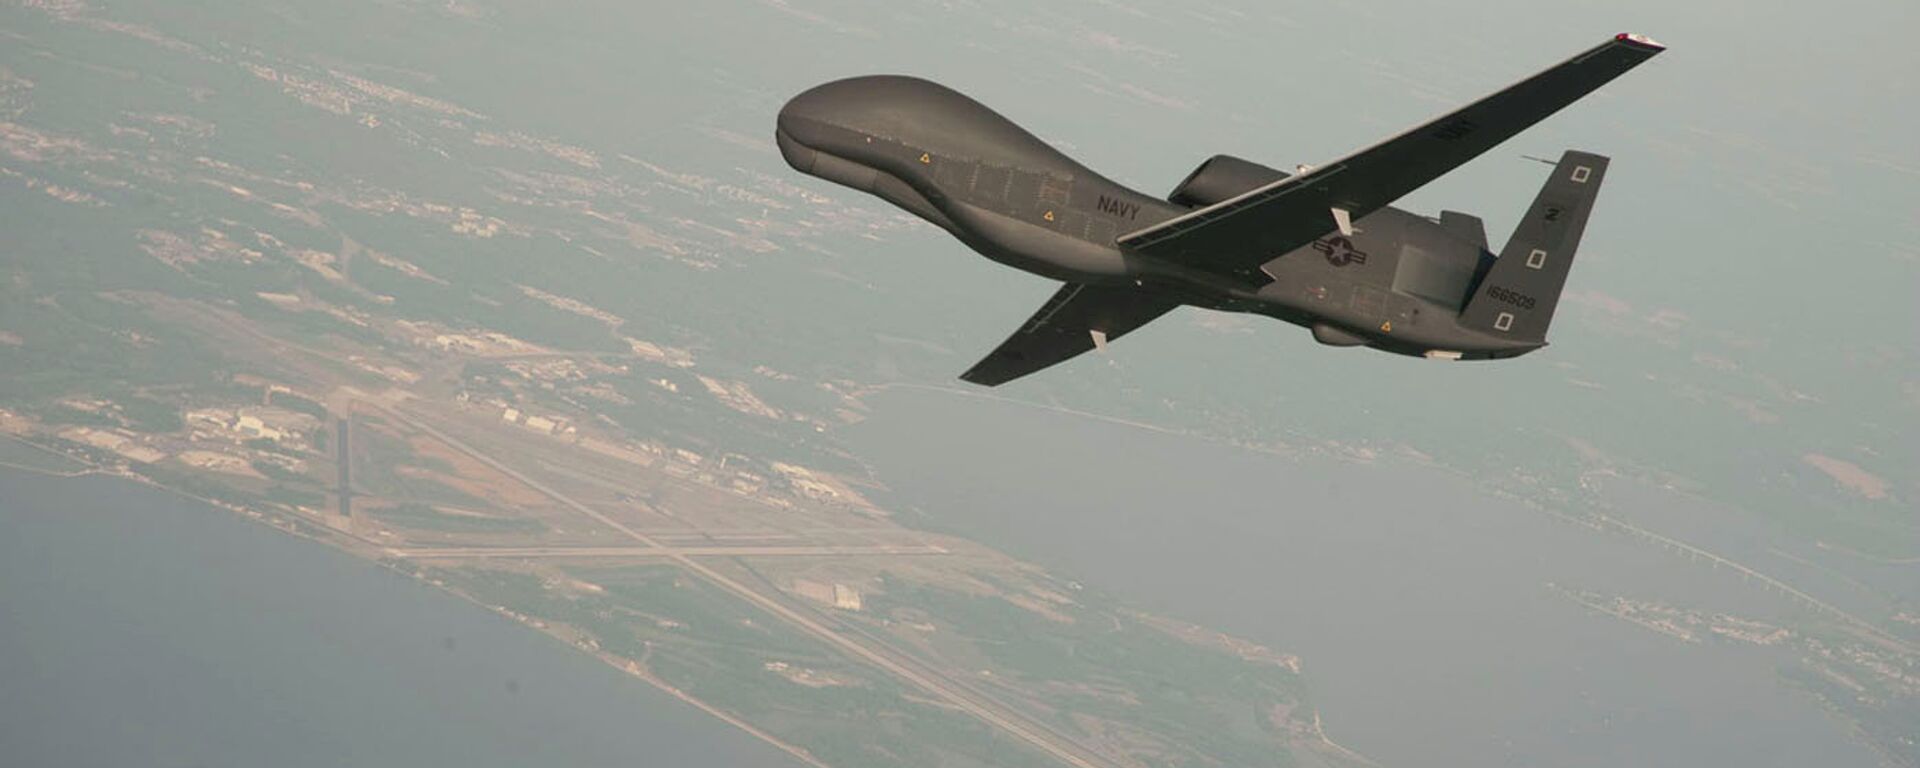 RQ-4 Global Hawk unmanned aerial vehicle conducts tests over Naval Air Station Patuxent River - Sputnik International, 1920, 26.02.2022